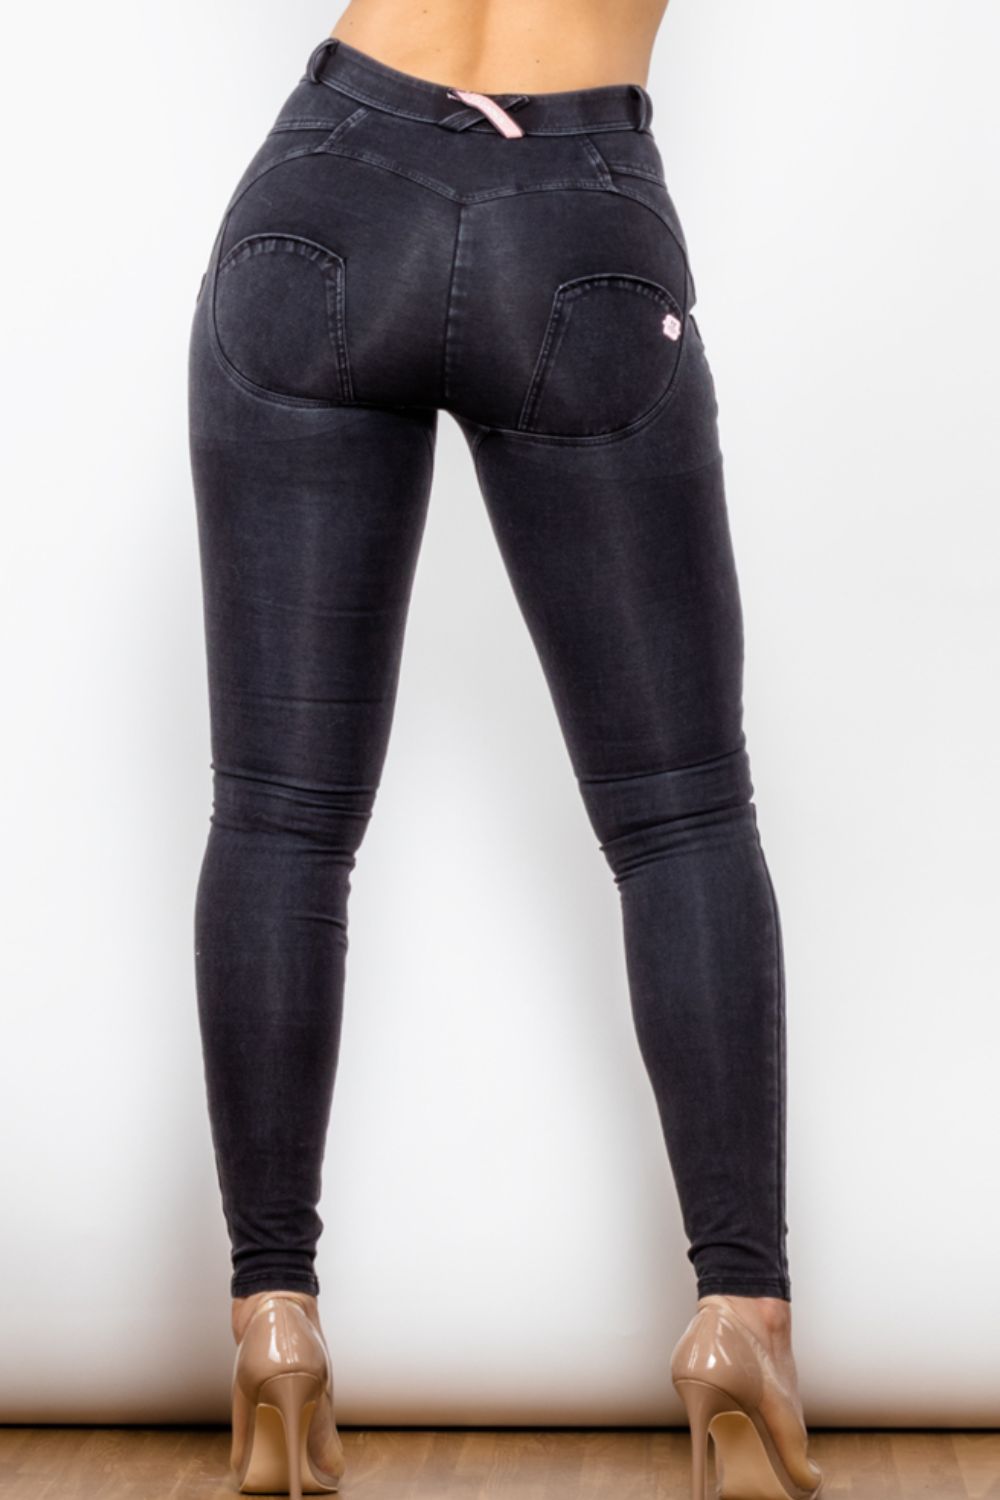 Shimmery Black Skinny Long Jeans - Button Closure